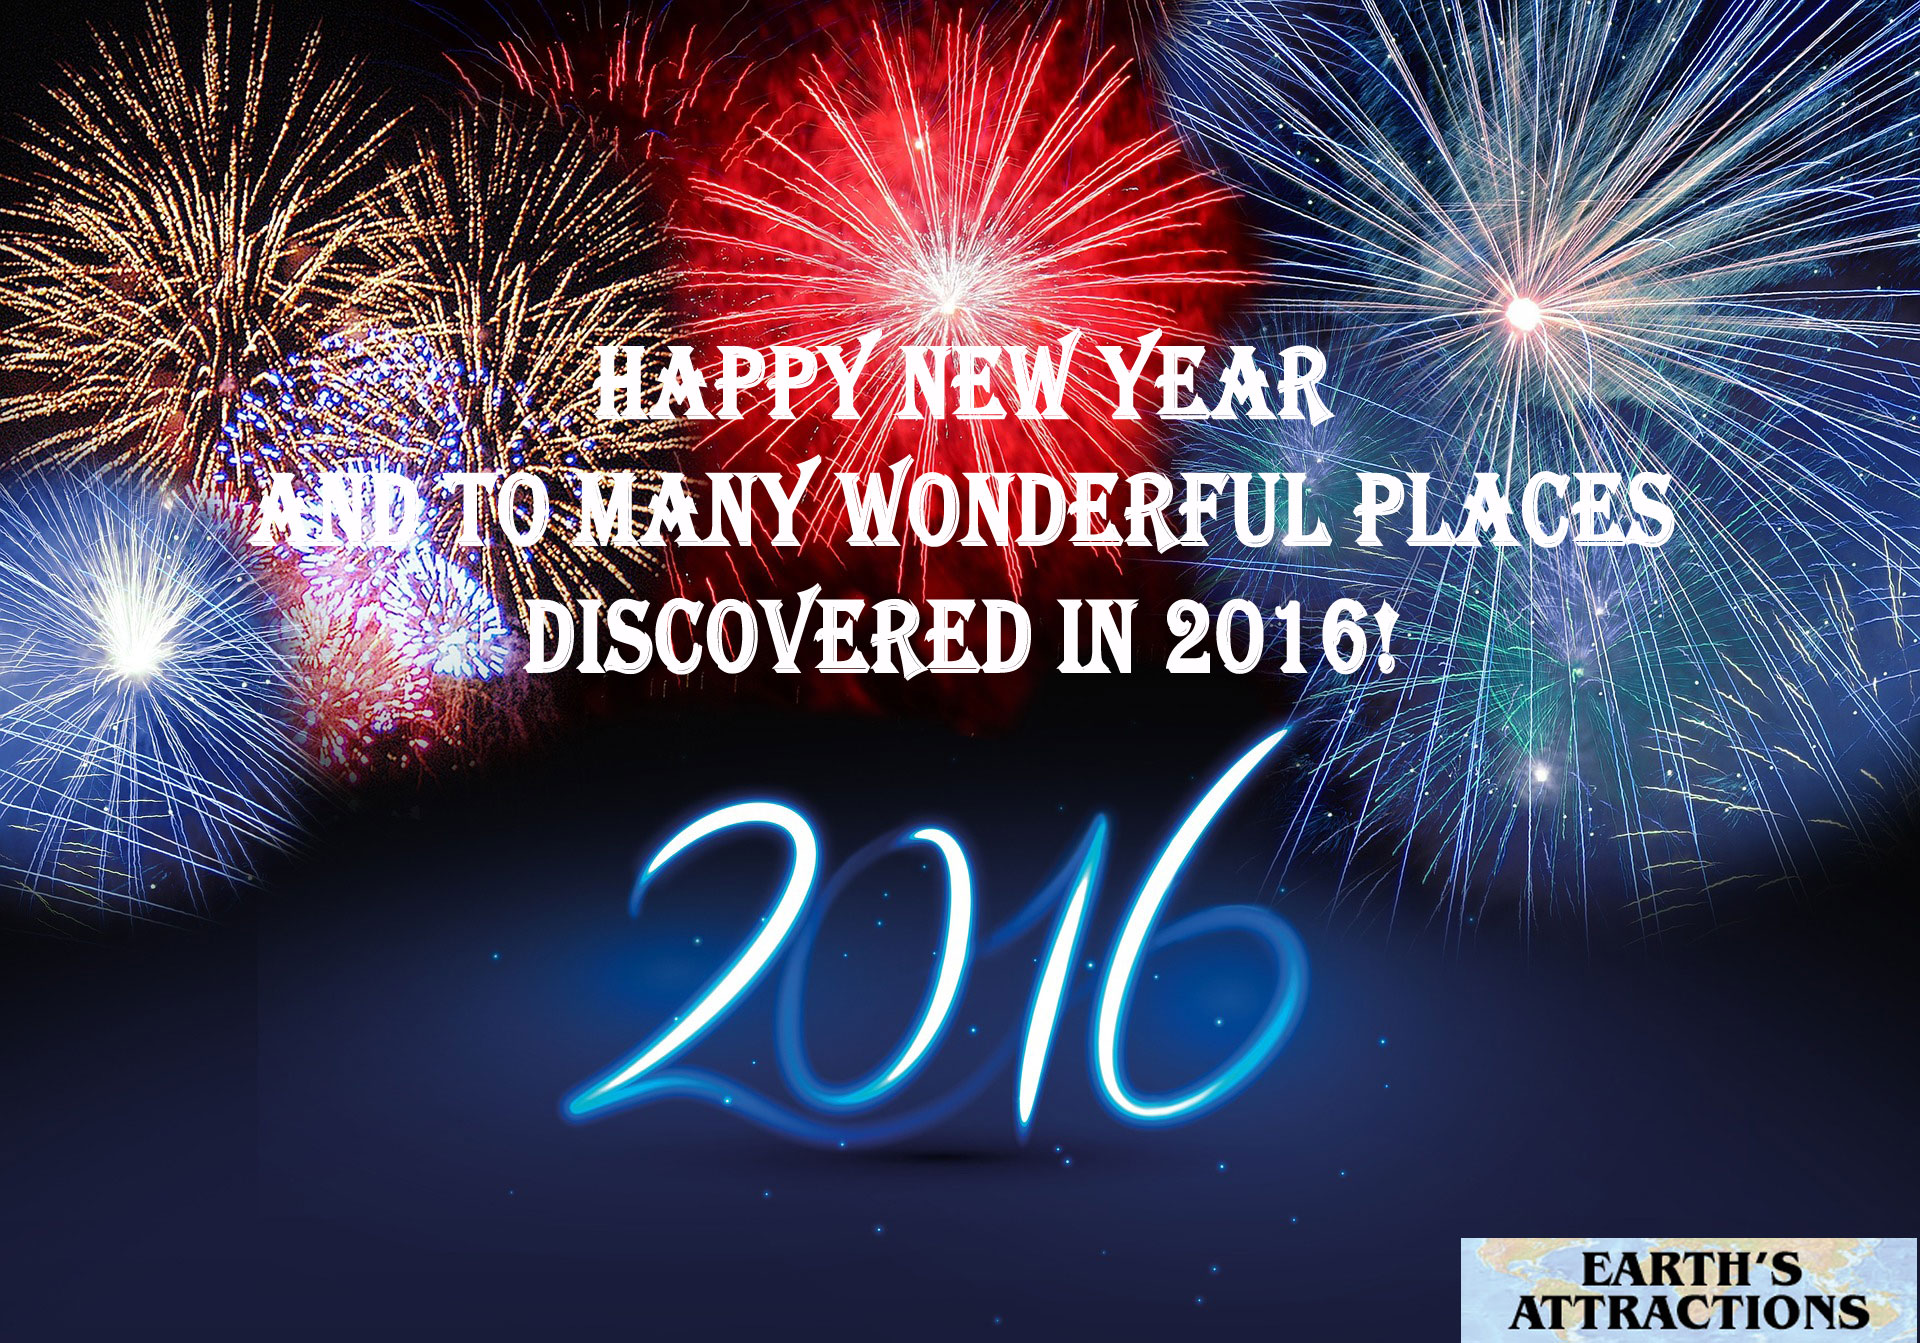 2016 is here: Happy New Year!